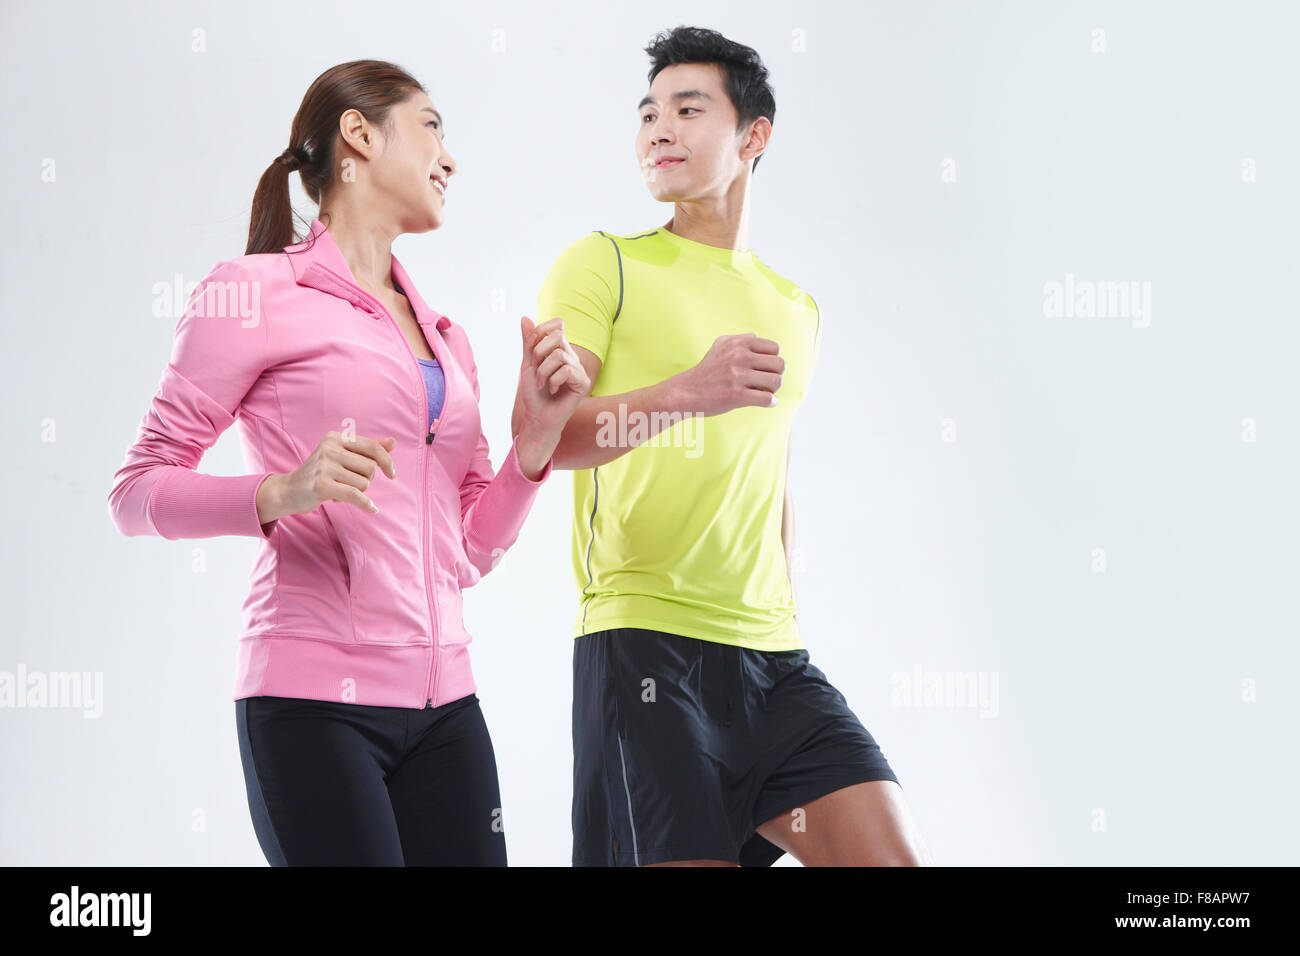 Smiling couple jogging face to face Stock Photo